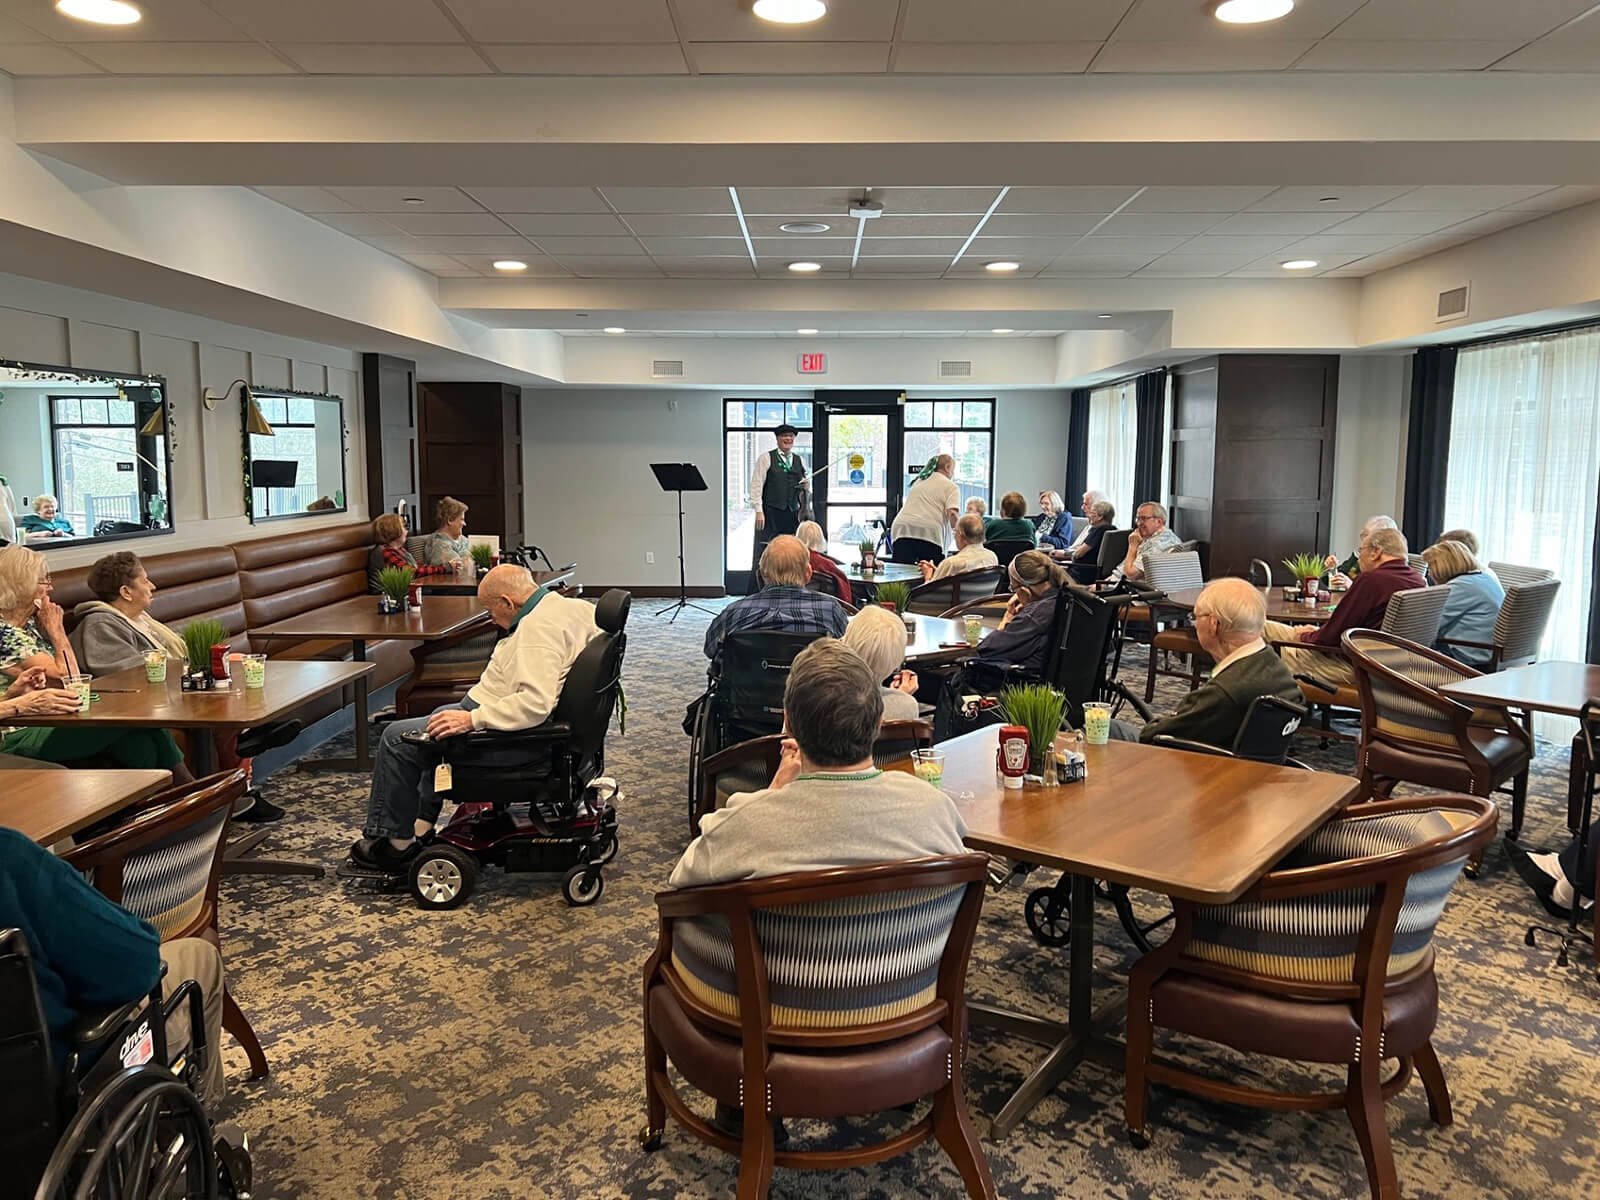 Seniors gathered for a St. Patrick's Day event at The Waters of McMurray community area.